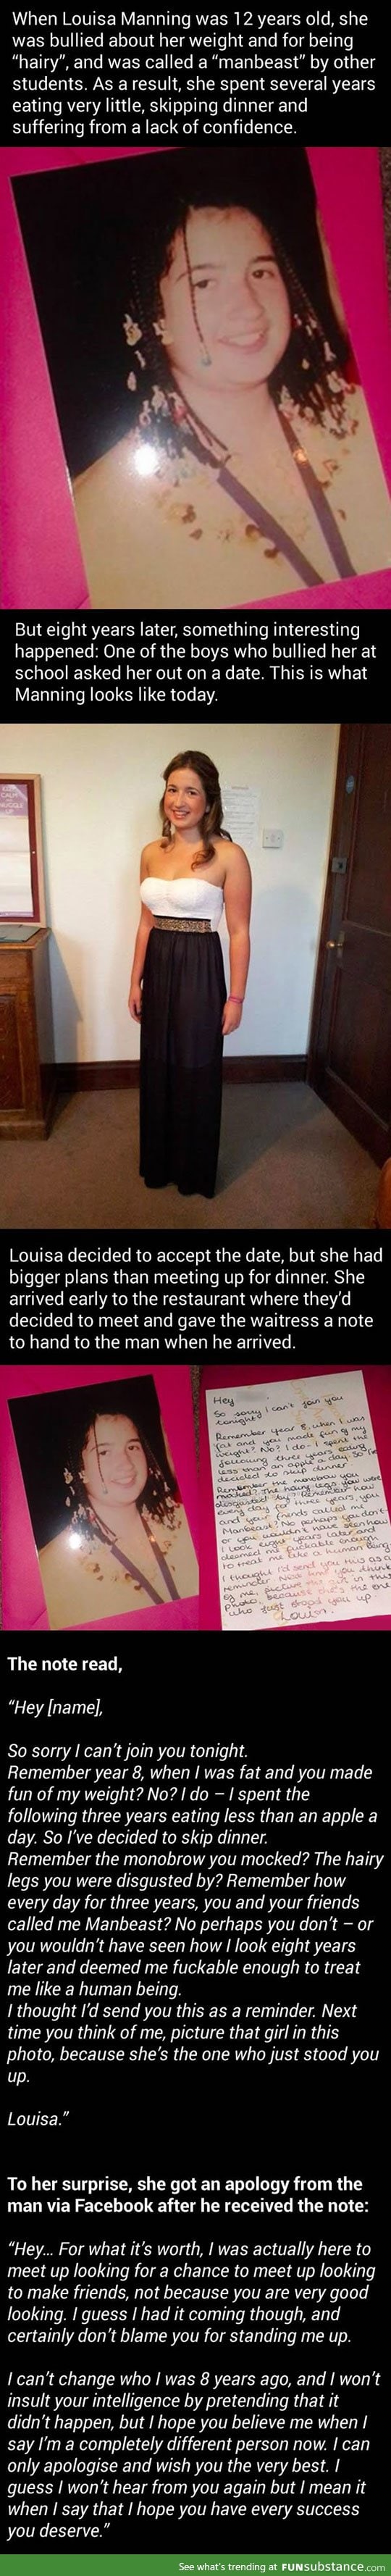 Former bully asked her out, this is how she reacted